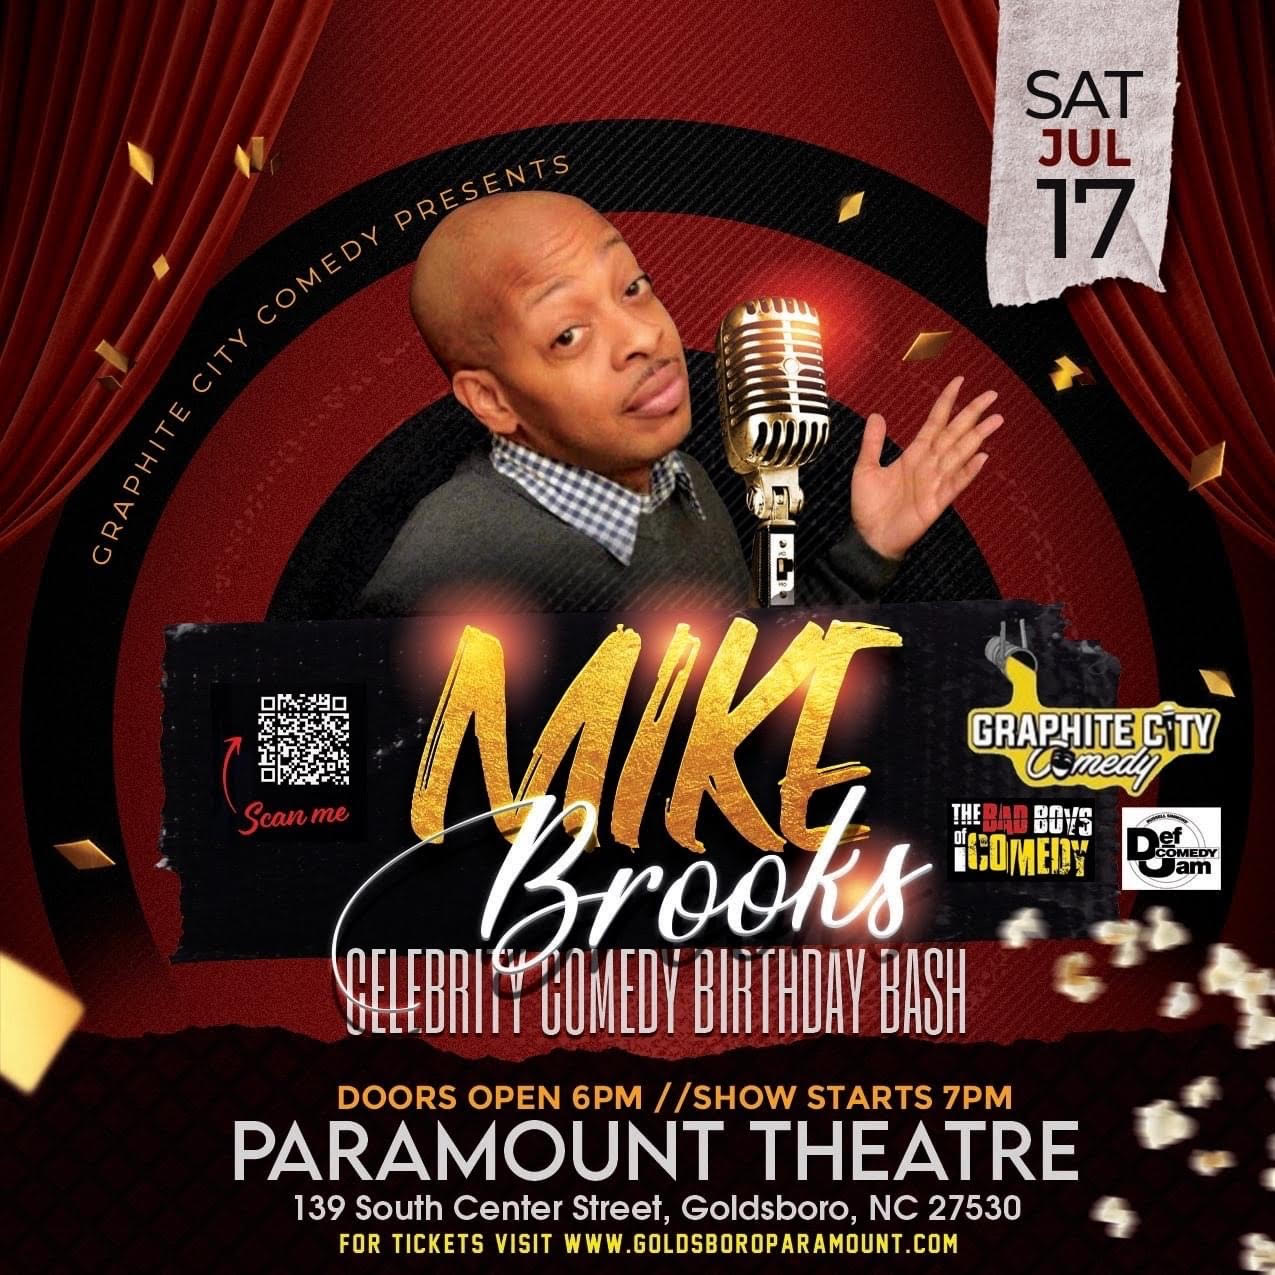 Mike Brooks Celebrity Comedy Birthday Bash at the Paramount Theatre in Goldsboro